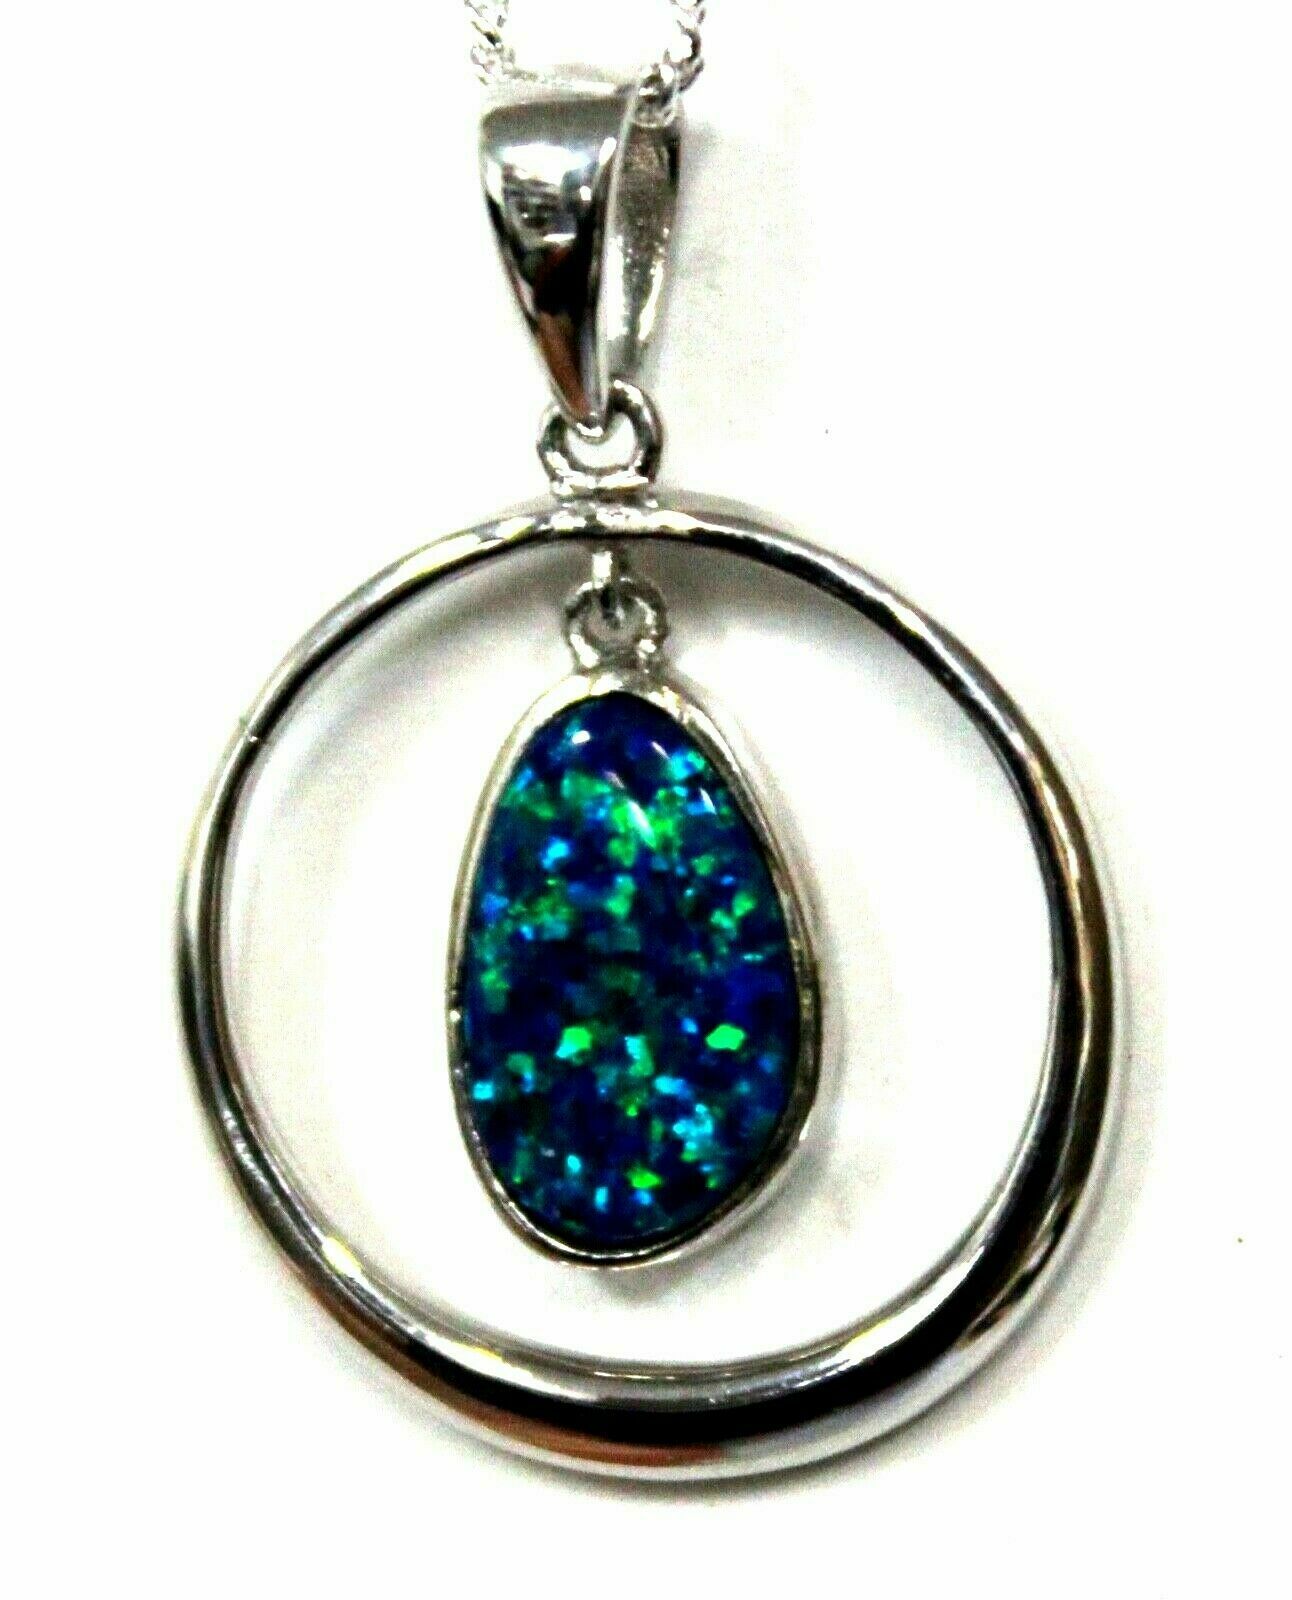 Mother's Day Jewellery Gift Precious Gem Stone Boulder Doublet Opal Pendant